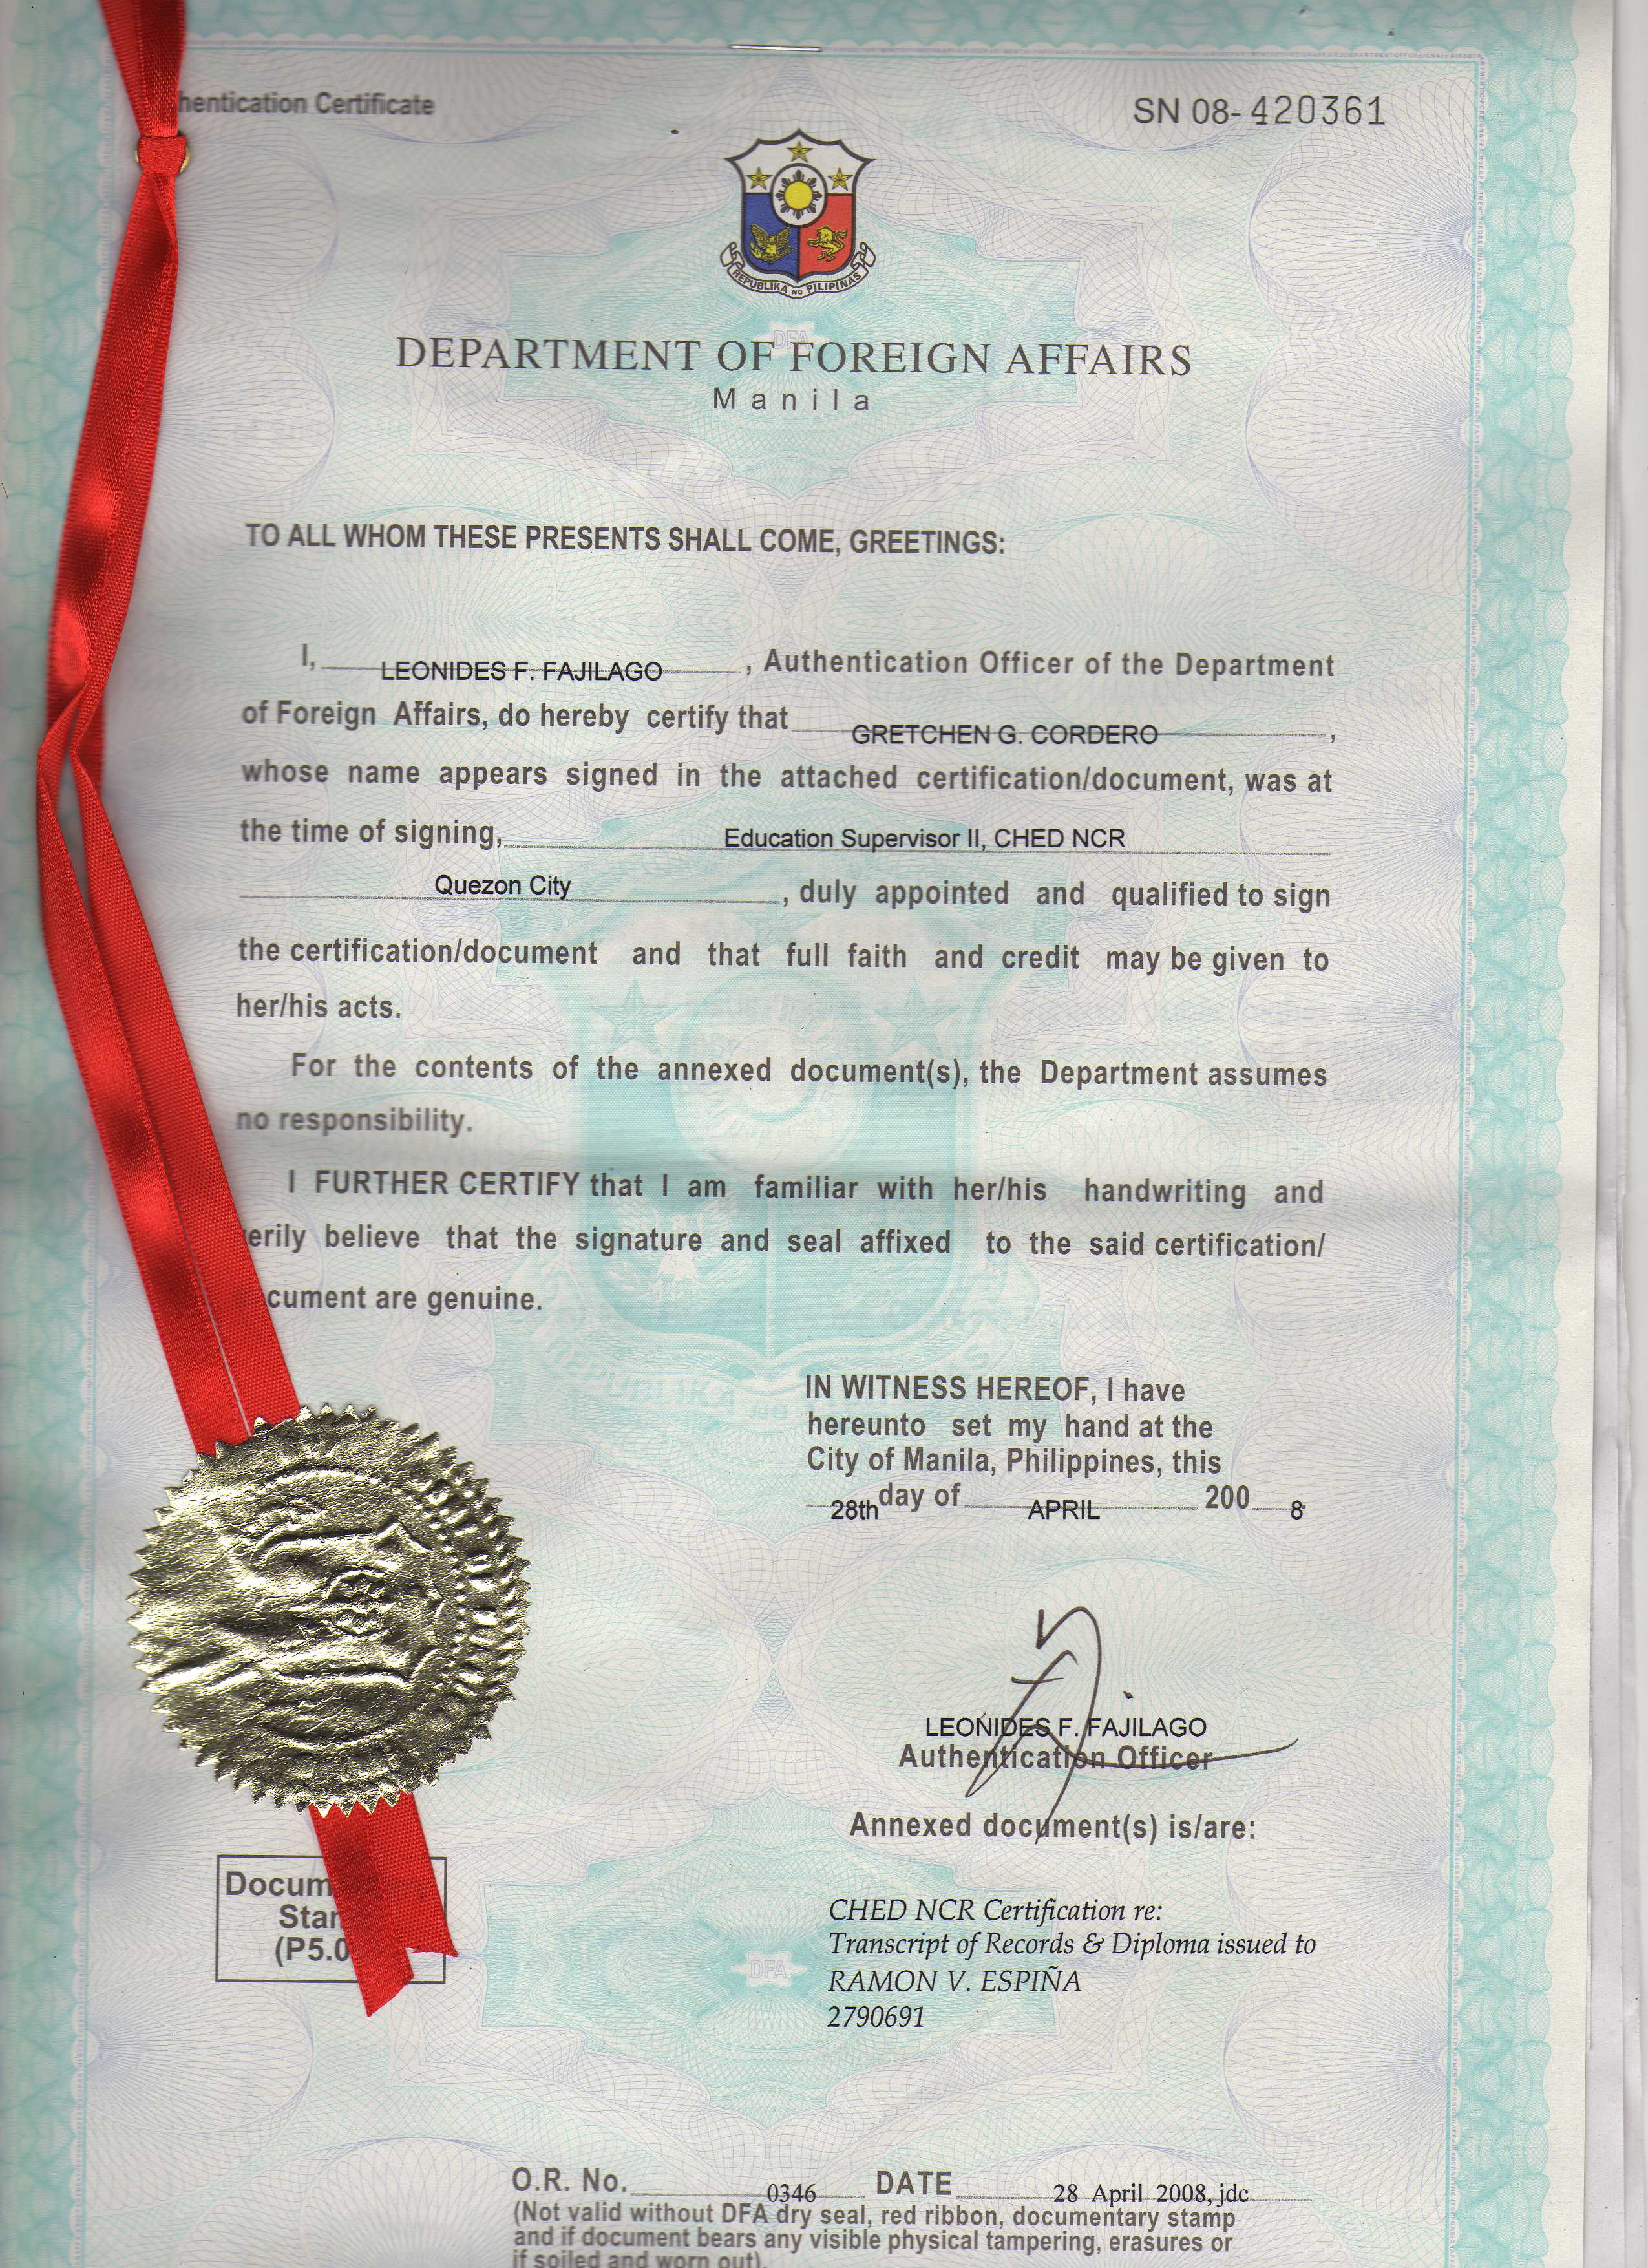 DEPARTMENT OF FOREIGN AFFAIRS

Manila

TO ALL WHOM THESE PRESENTS SHALL COME, GREETINGS:

ho  FONIDESF-FAJiLAGO + Authentication Officer of the Department

of Foreign Affairs, do hereby certify that eteHENG-CORBERO—

whose name appears signed in the attached certification/document, was at

the time of signing, Education Supervisor Il, CHEDNCR

——— QuezonCity duly appointed and qualified to sign

the certification/document and that full faith and credit may be given to
her/his acts.
For the contents of the annexed document(s), the Department assumes
no responsibility.
I FURTHER CERTIFY that | am familiar with her/his handwriting and
erily believe that the signature and seal affixed to the said certification/

ument are genuine.

IN WITNESS HEREOF, | have
hereunto set my hand at the
City of Manila, Philippines, this

—ogpdayof ony 200 4

 

Annexed docyment(s) is/are:

CHED NCR Certification re:

Transcript of Records & Diploma issued to
RAMON V. ESPINA

2790691

OR. No. 34 DATE 2g Apil 2008 jdc
(Not valid without DFA dry seal, red ribbon, documentary stamp

and if document bears any visible physical tampering, erasures or
if spilled and worn nut)